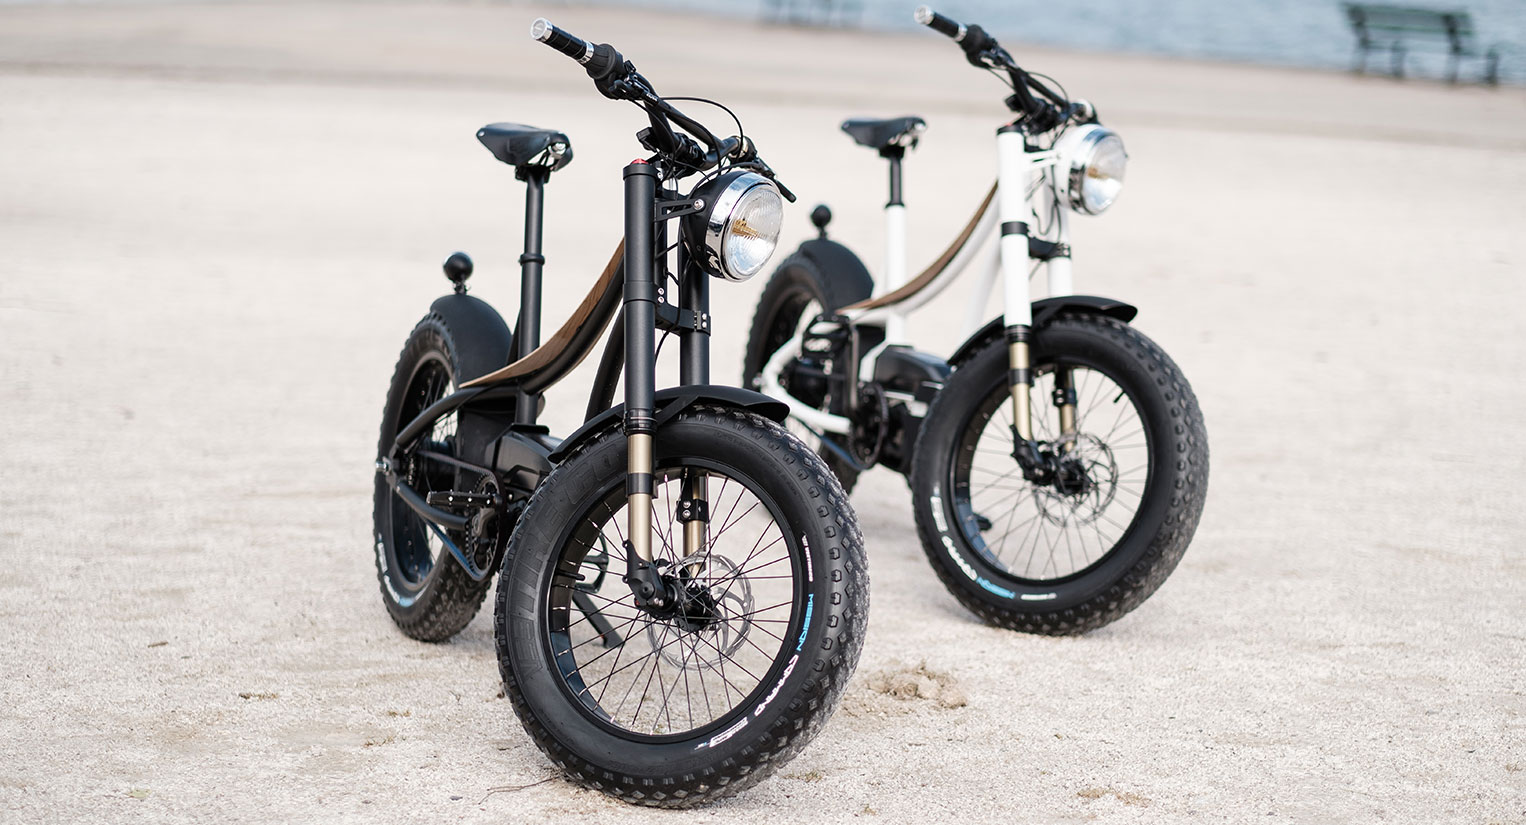 Exceptional electric bike | Made in France | Ateliers HeritageBike